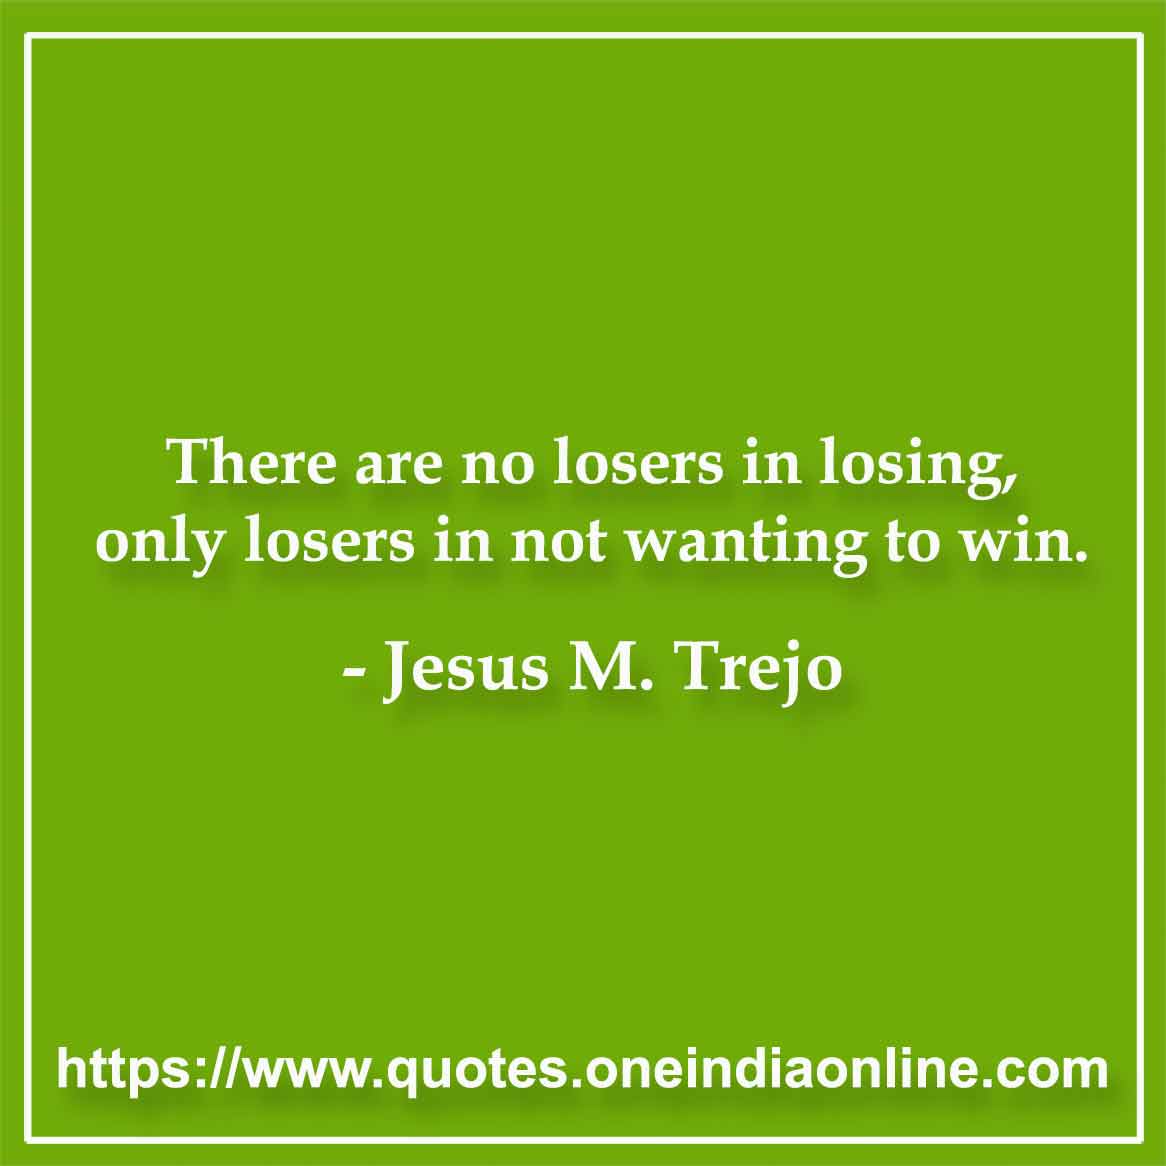 There are no losers in losing, only losers in not wanting to win.

-by Jesus M. Trejo